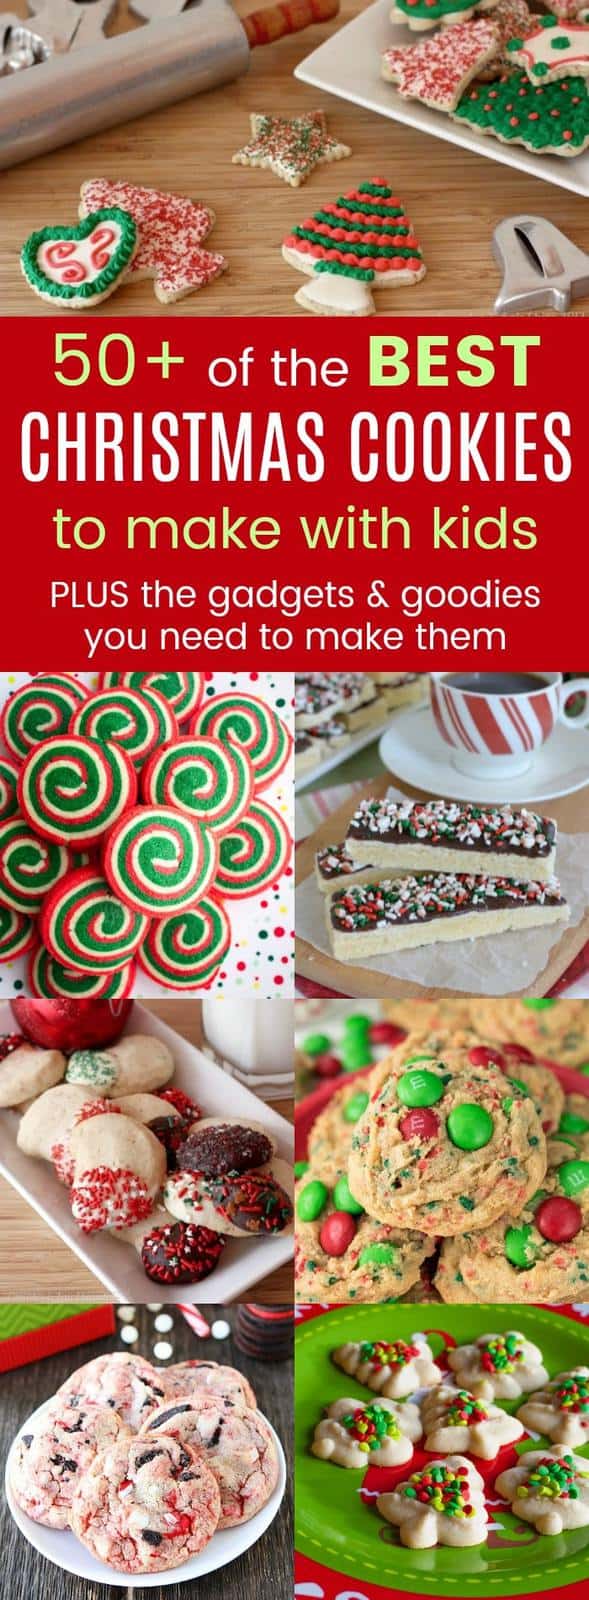 The Best Christmas Cookies for Kids - over 50 easy cookie recipes to bake with kids for the holidays, plus my favorite kitchen gadgets and goodies to make them. Santa approved!